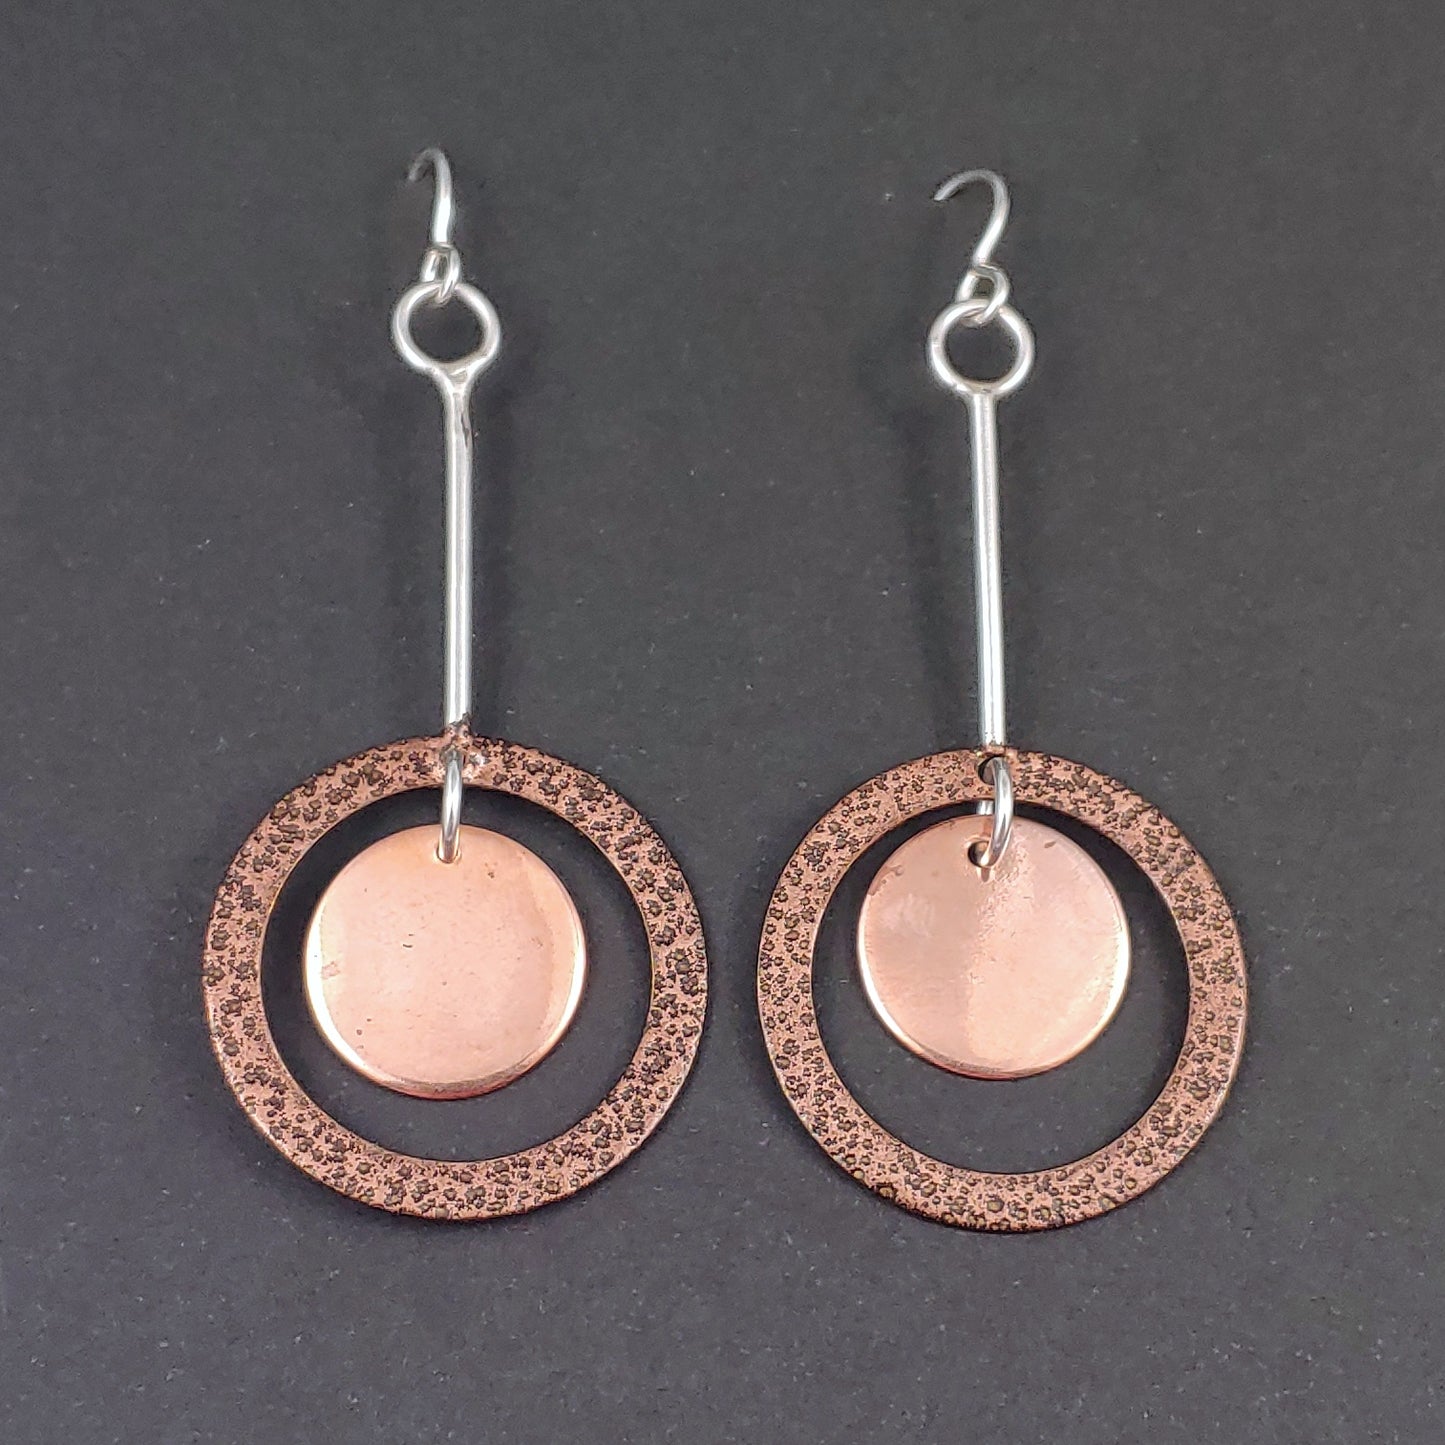 The Double Round Earrings - Copper